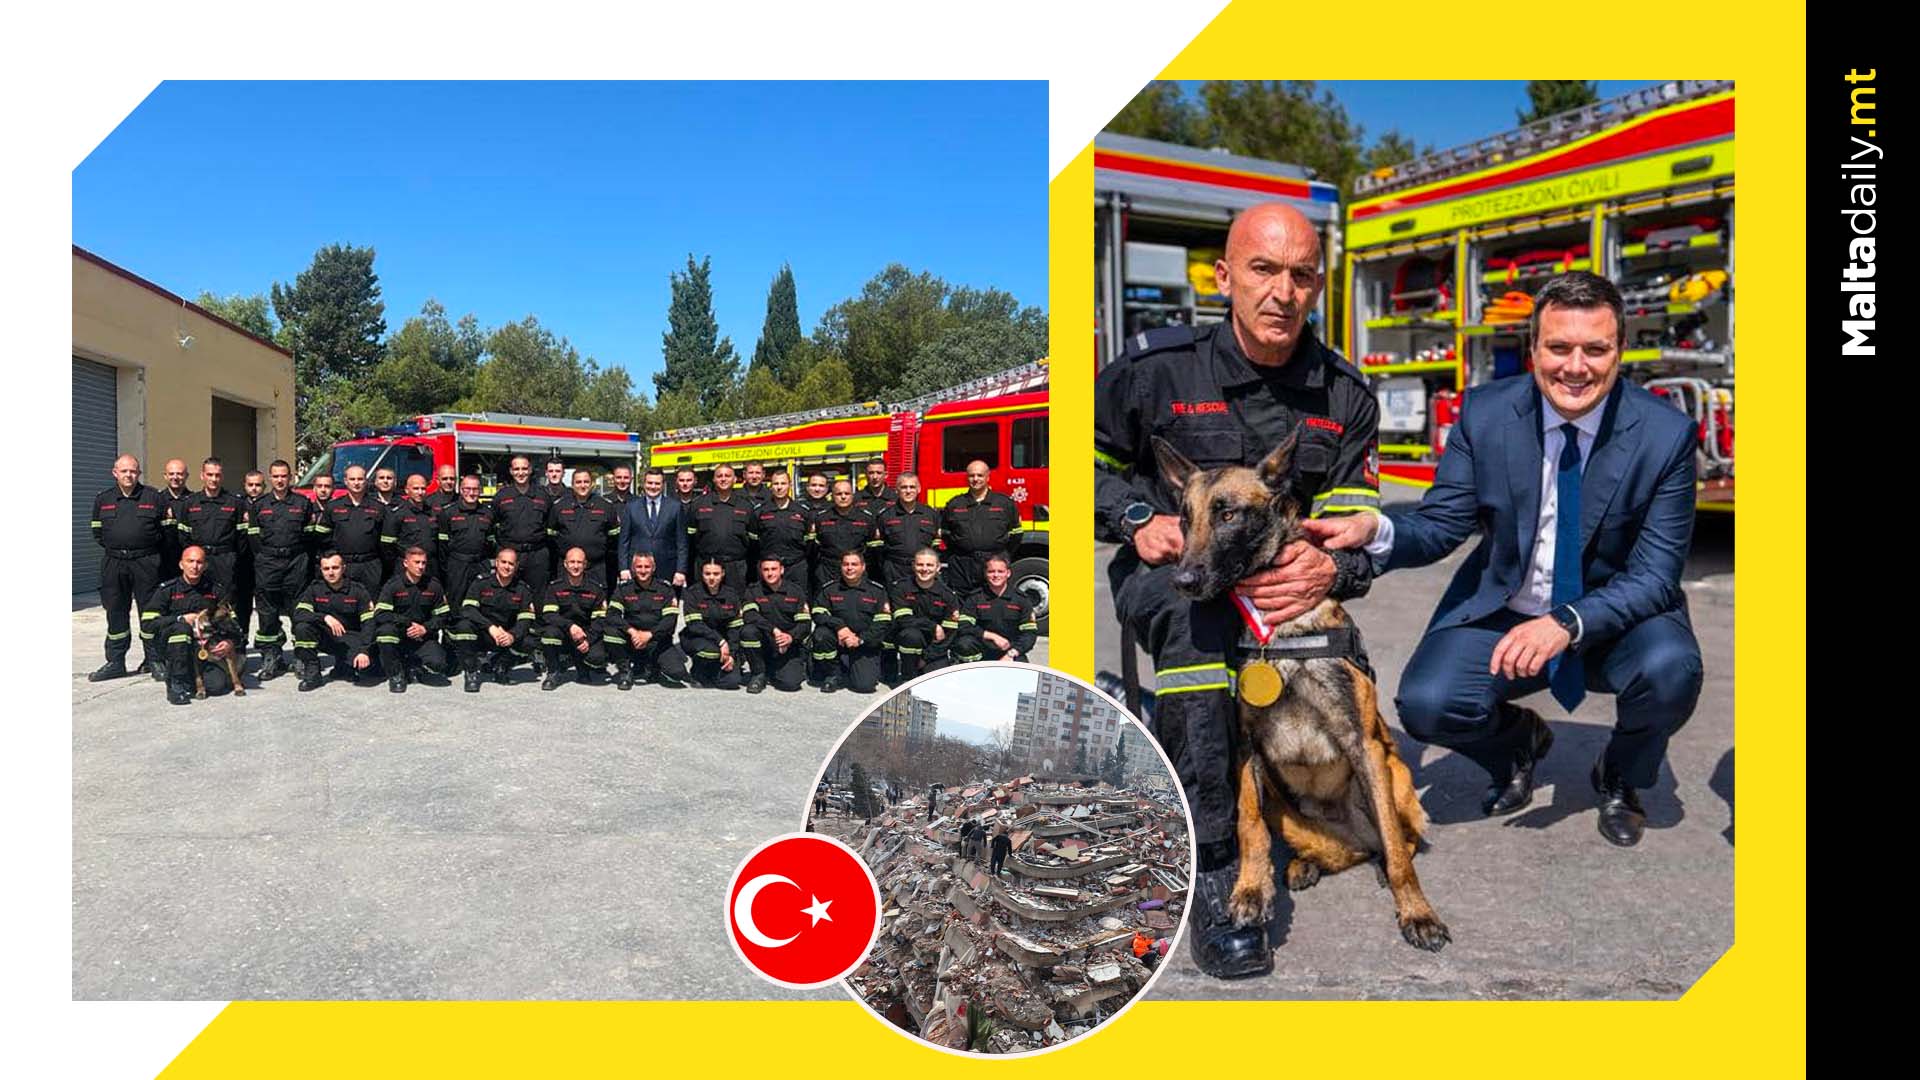 Tribute to 38 Civil Protection heroes after Turkey earthquake mission